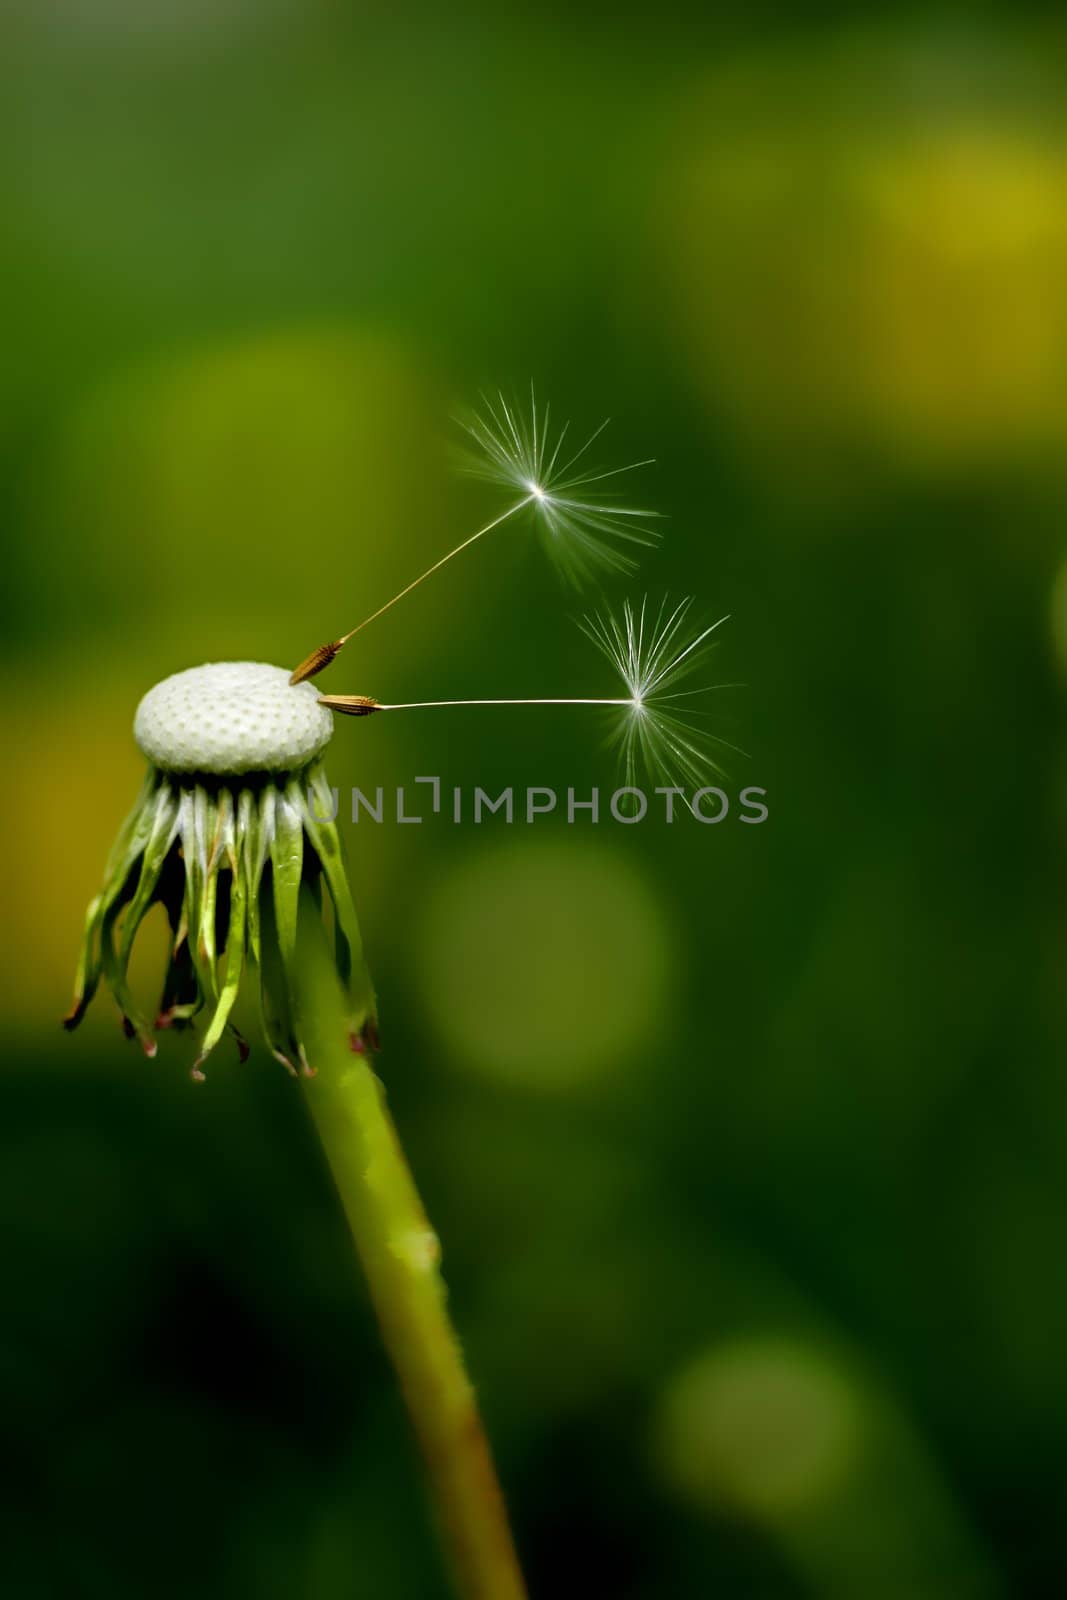 Two Dandelion seeds by AlexKhrom